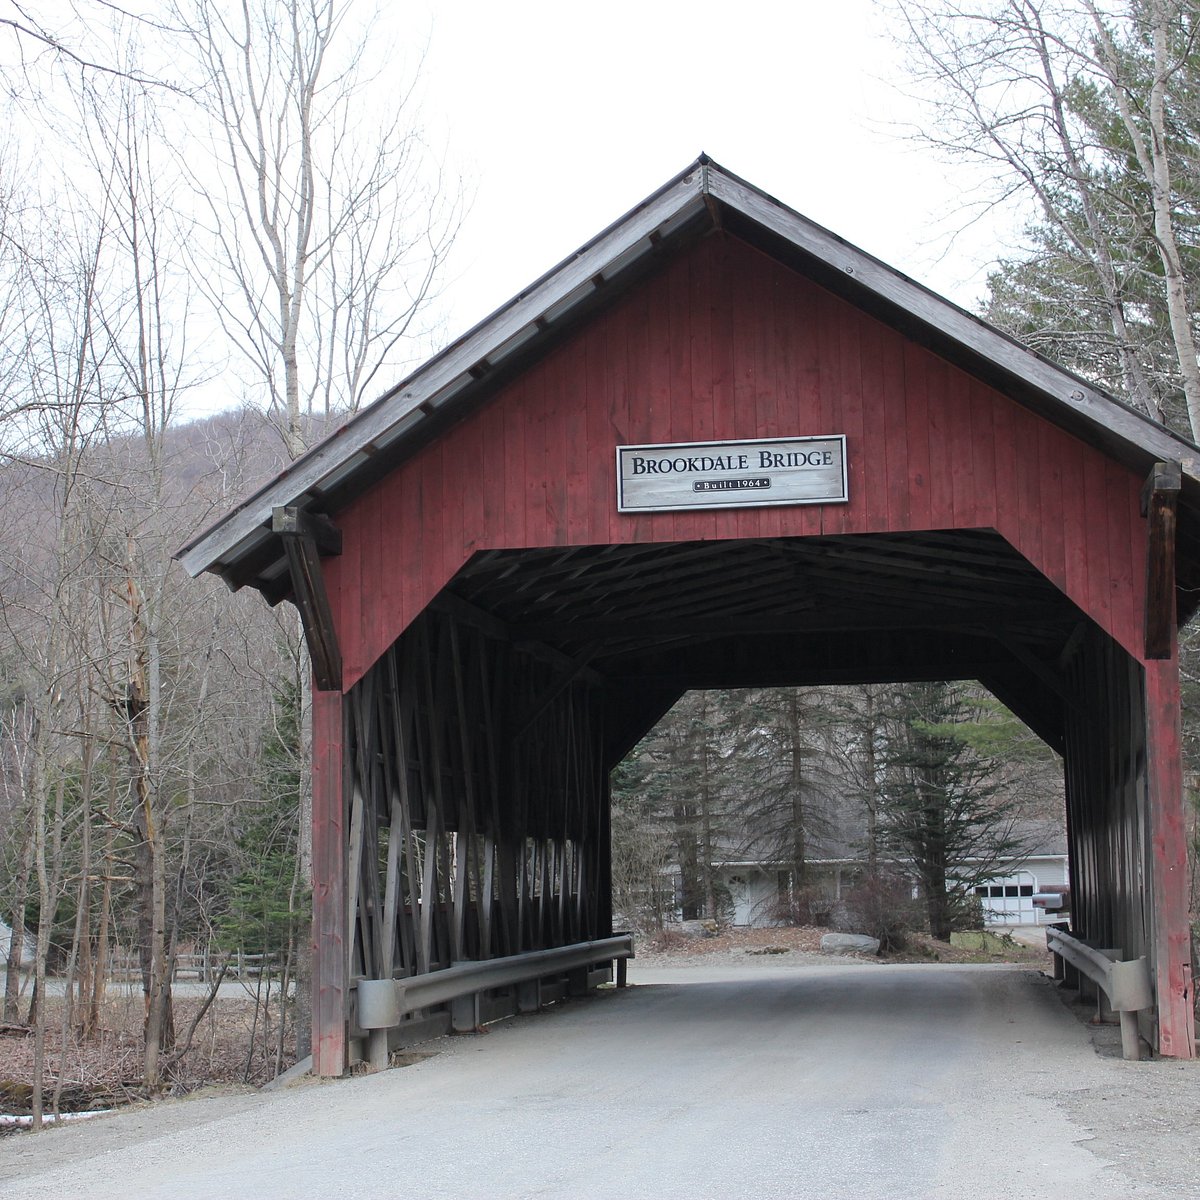 Thrifting in Central Vermont: A Field Guide - The Montpelier Bridge